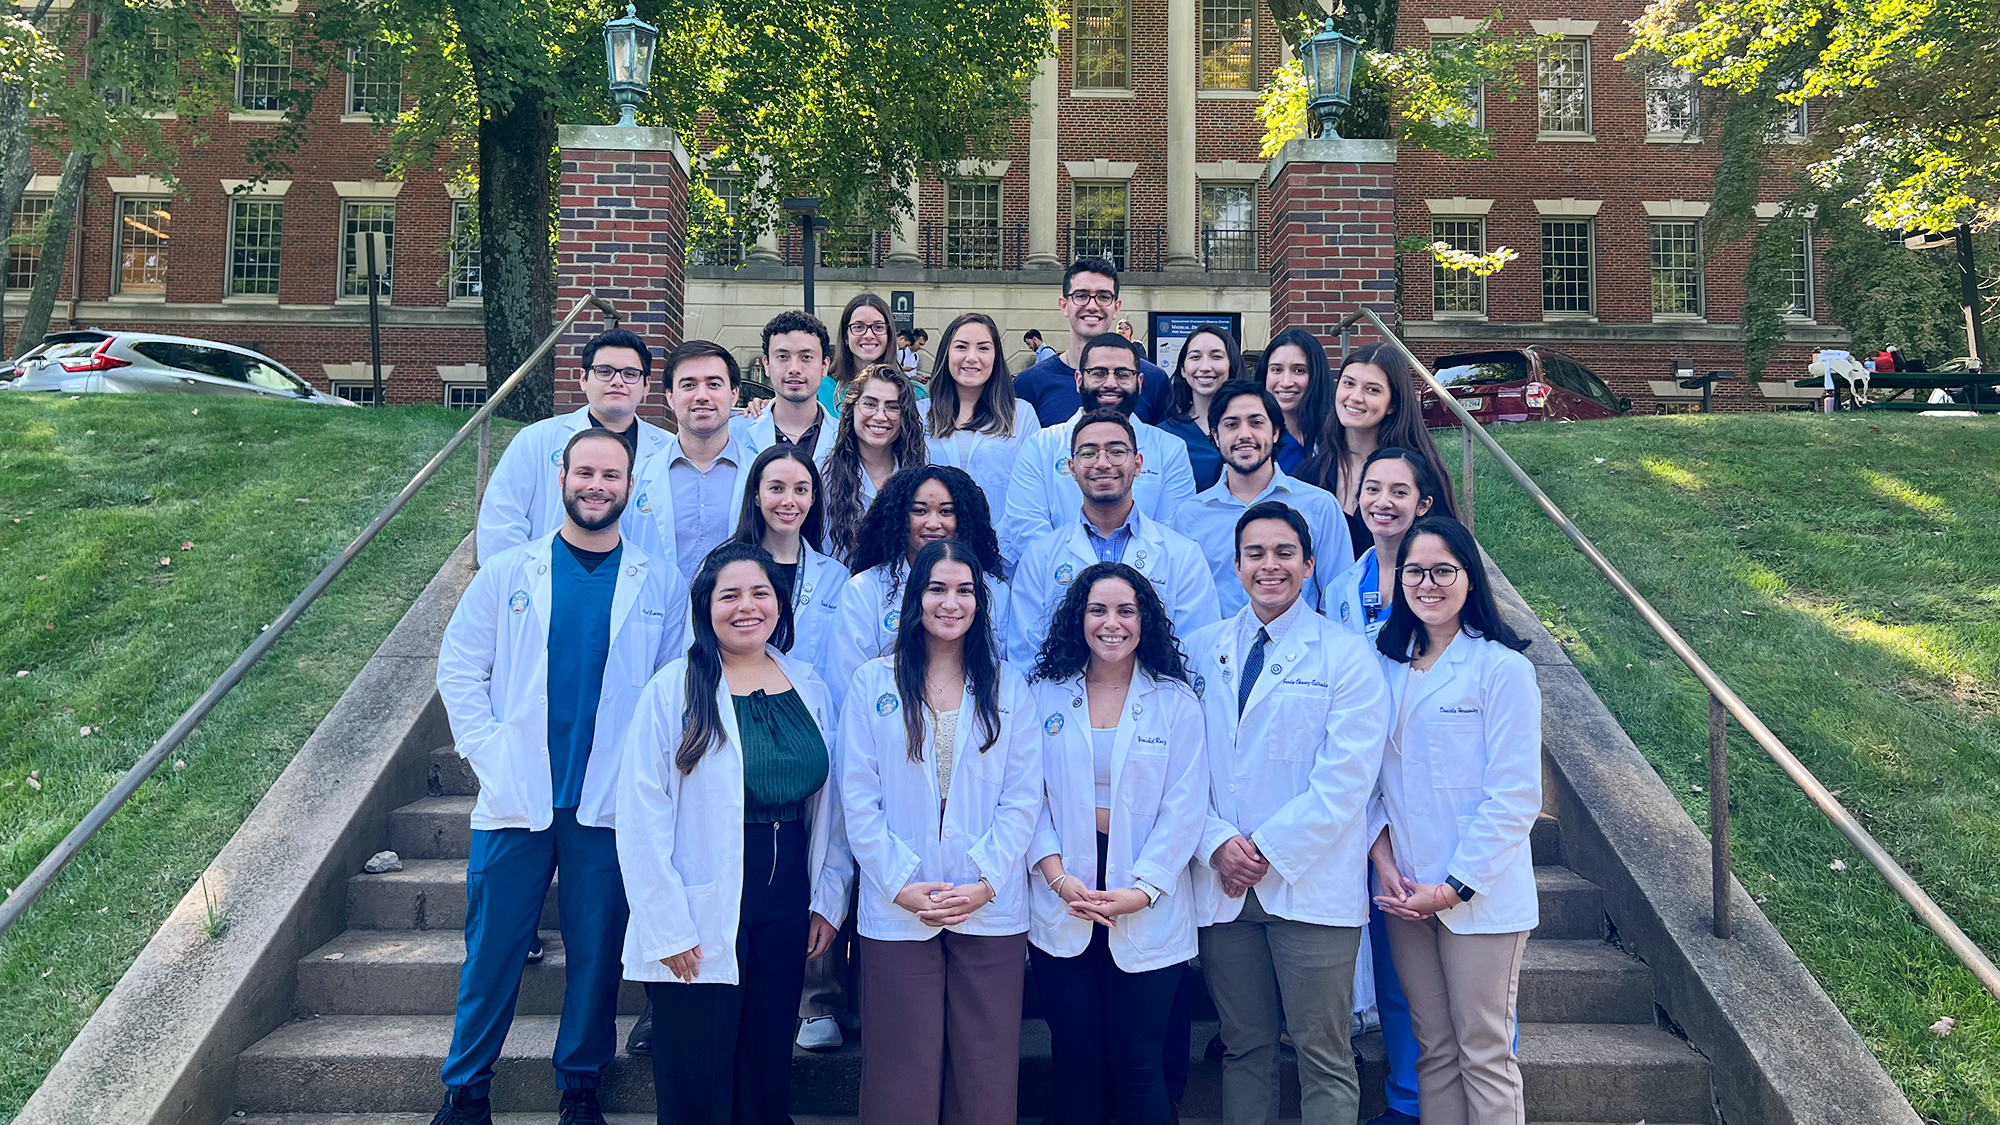 A group of medical students stands on the steps in front of the Med-Dent Building on campus